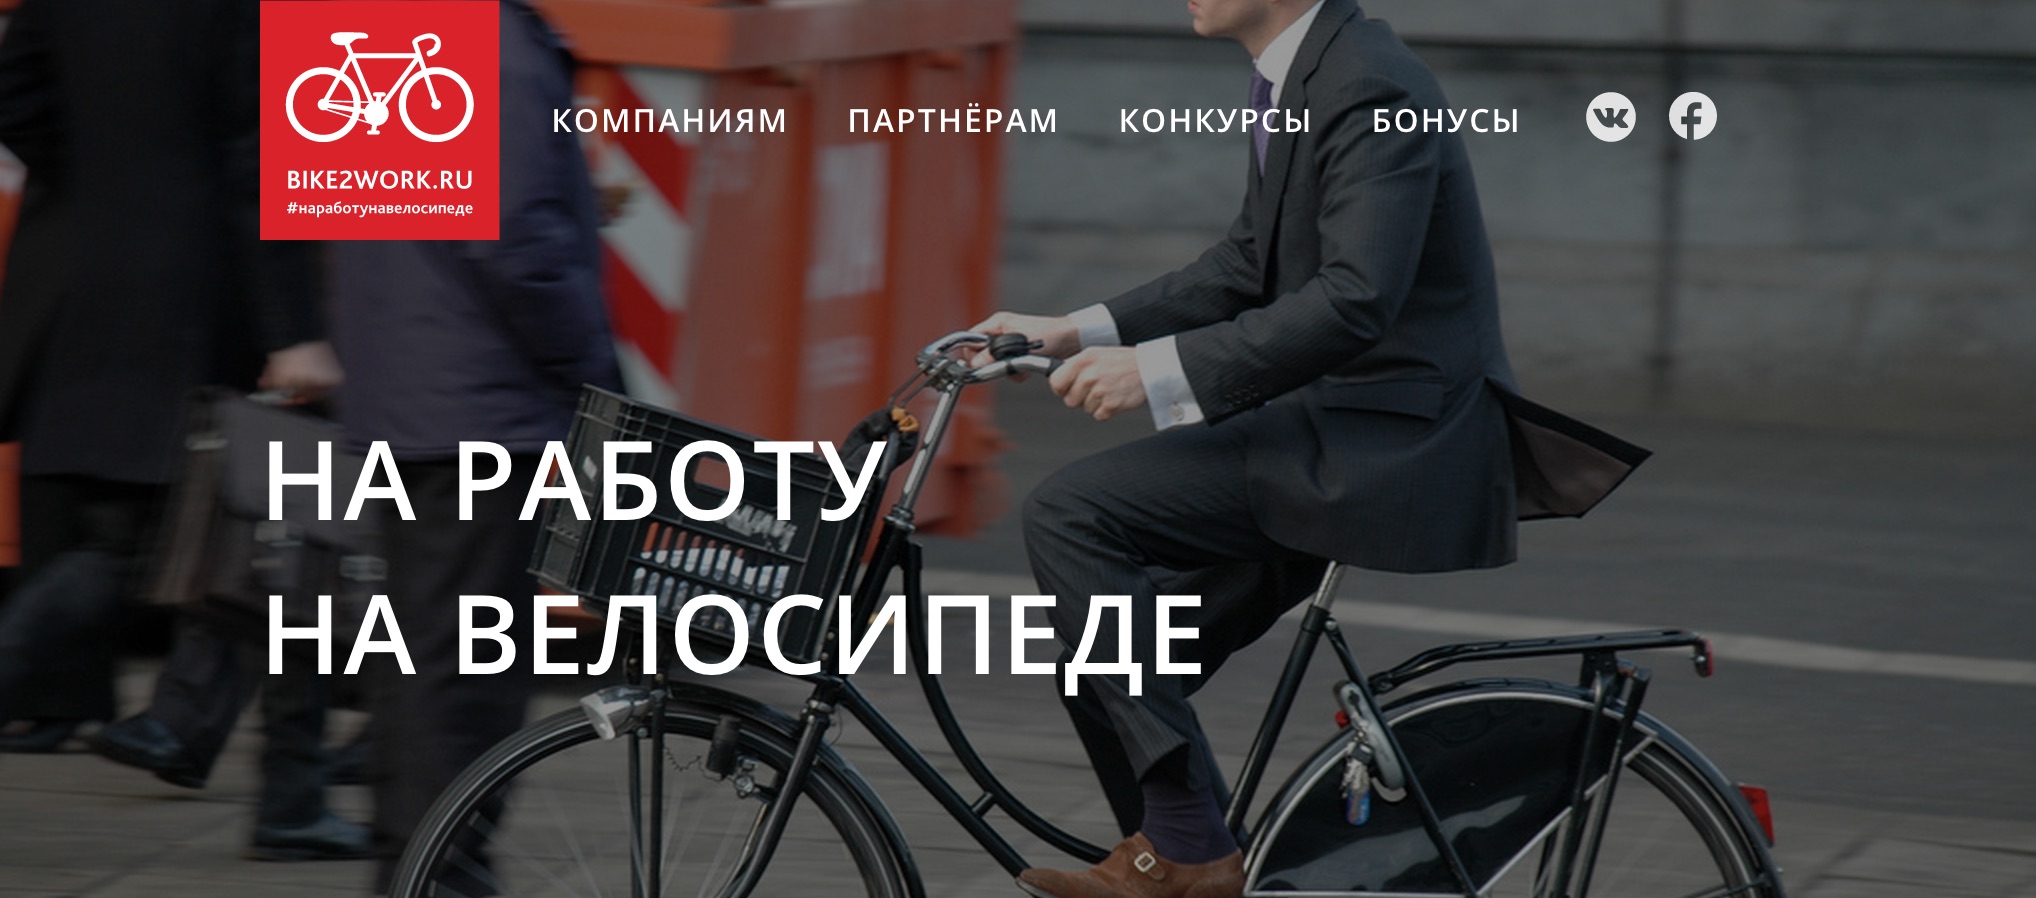 Bike to Work website, man in suit on a black bycicle